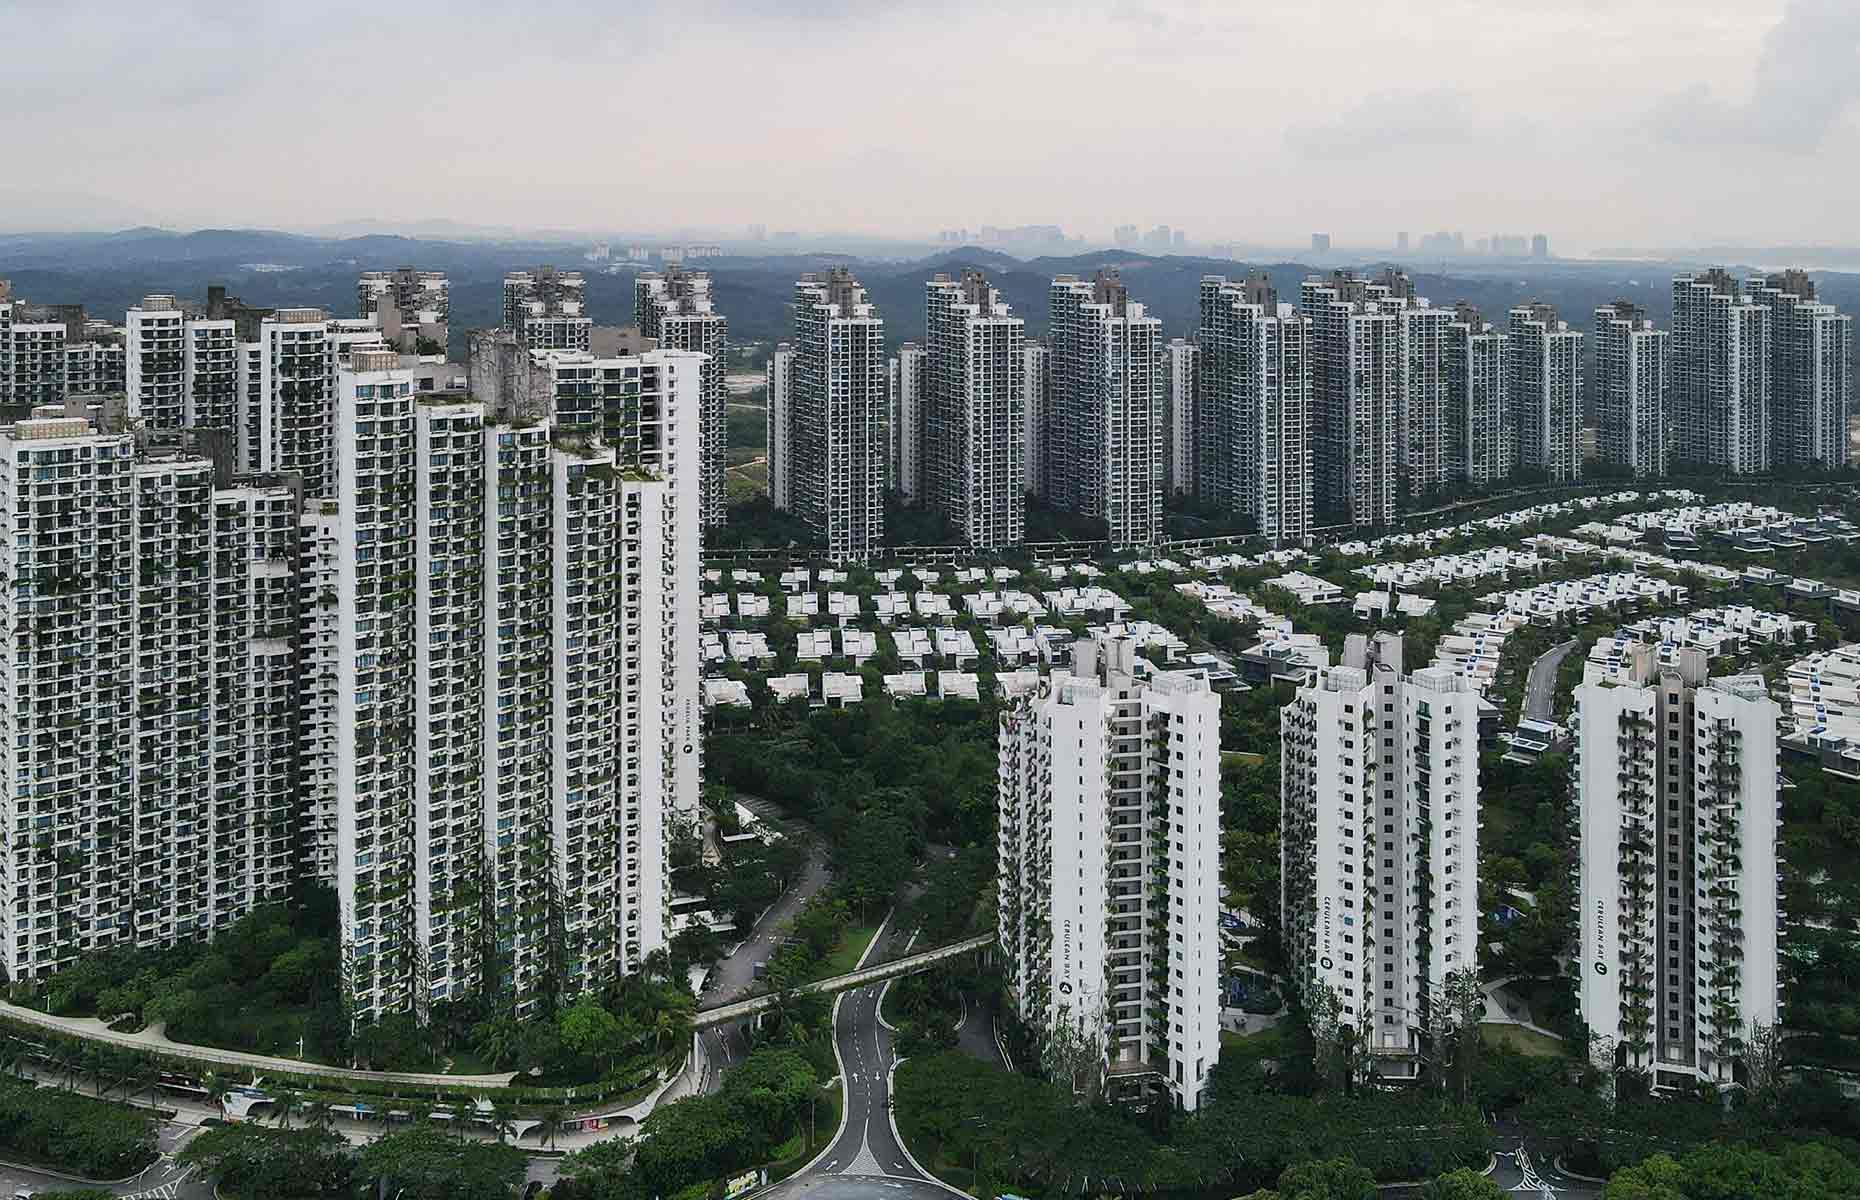 <p>Built across a chain of four artificial islands, Forest City was once touted as a futuristic new eco-community. Plans for the $100 billion (£79bn) city on the coastline of southern Malaysia were reportedly announced in 2016 by major Chinese property developer Country Garden. China's property market was booming at the time and according to the <em>BBC</em>, the development was aimed at affluent Chinese buyers searching for a second home abroad.</p>  <p>Marketed as a "dream paradise for all mankind," the settlement was intended to occupy over 7,400 acres, featuring high-end residences, restaurants, bars, a golf course, a waterpark and commercial offices. It was designed to accommodate almost one million people, yet its streets now stand desolate.</p>